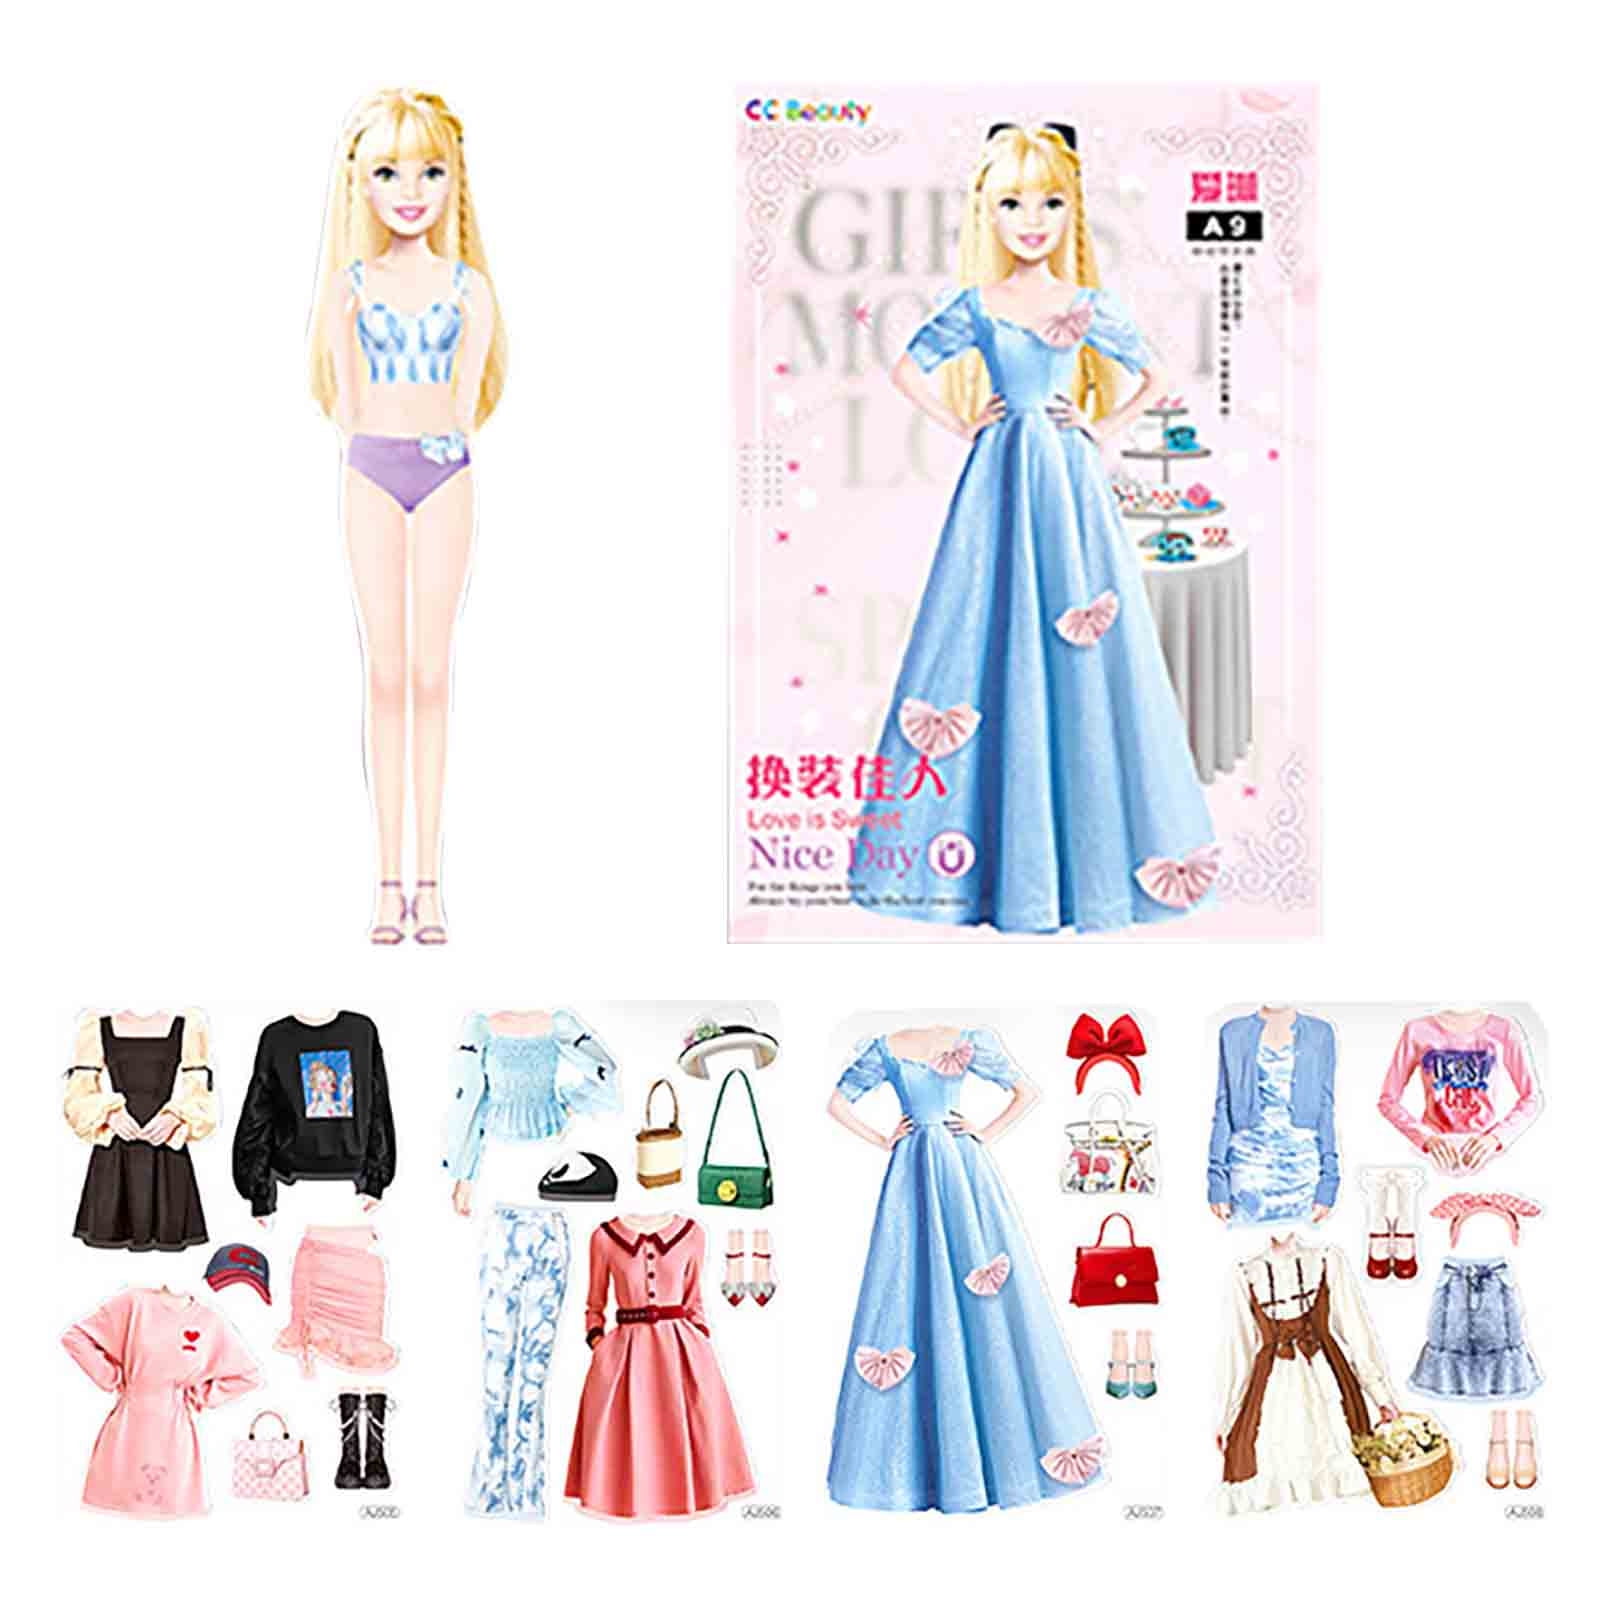 Magnetic Paper Dolls Magnetic Dolls Dress Up Toy Portable Princess